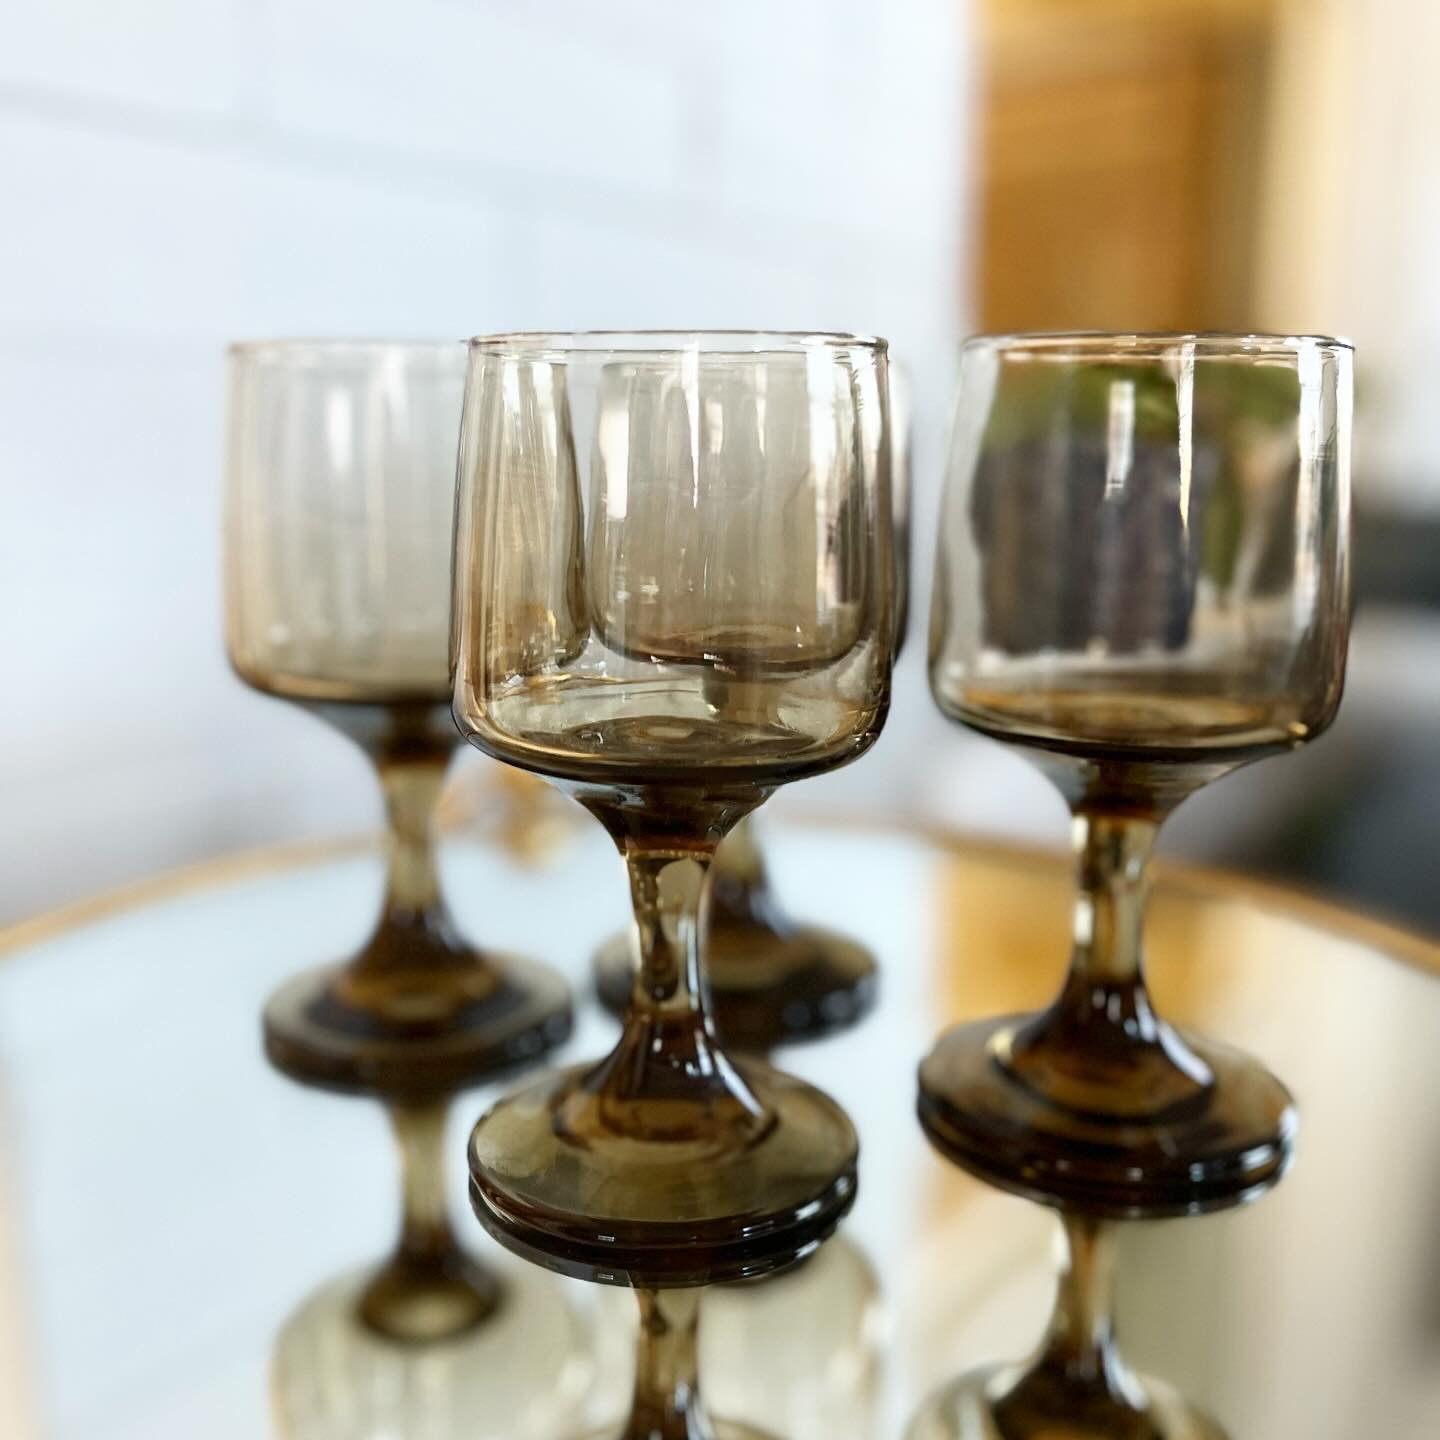 Fun set of 4 Vintage Libbey Tawny Accent Brown Wine Glasses!

Find these and more amazing vintage glassware finds from Siren this Spring! Shop Siren: 

&bull; @fireflyhandmade Spring Market onMay 4th &amp; 5th on Old South Gaylord Street

&bull; Spri